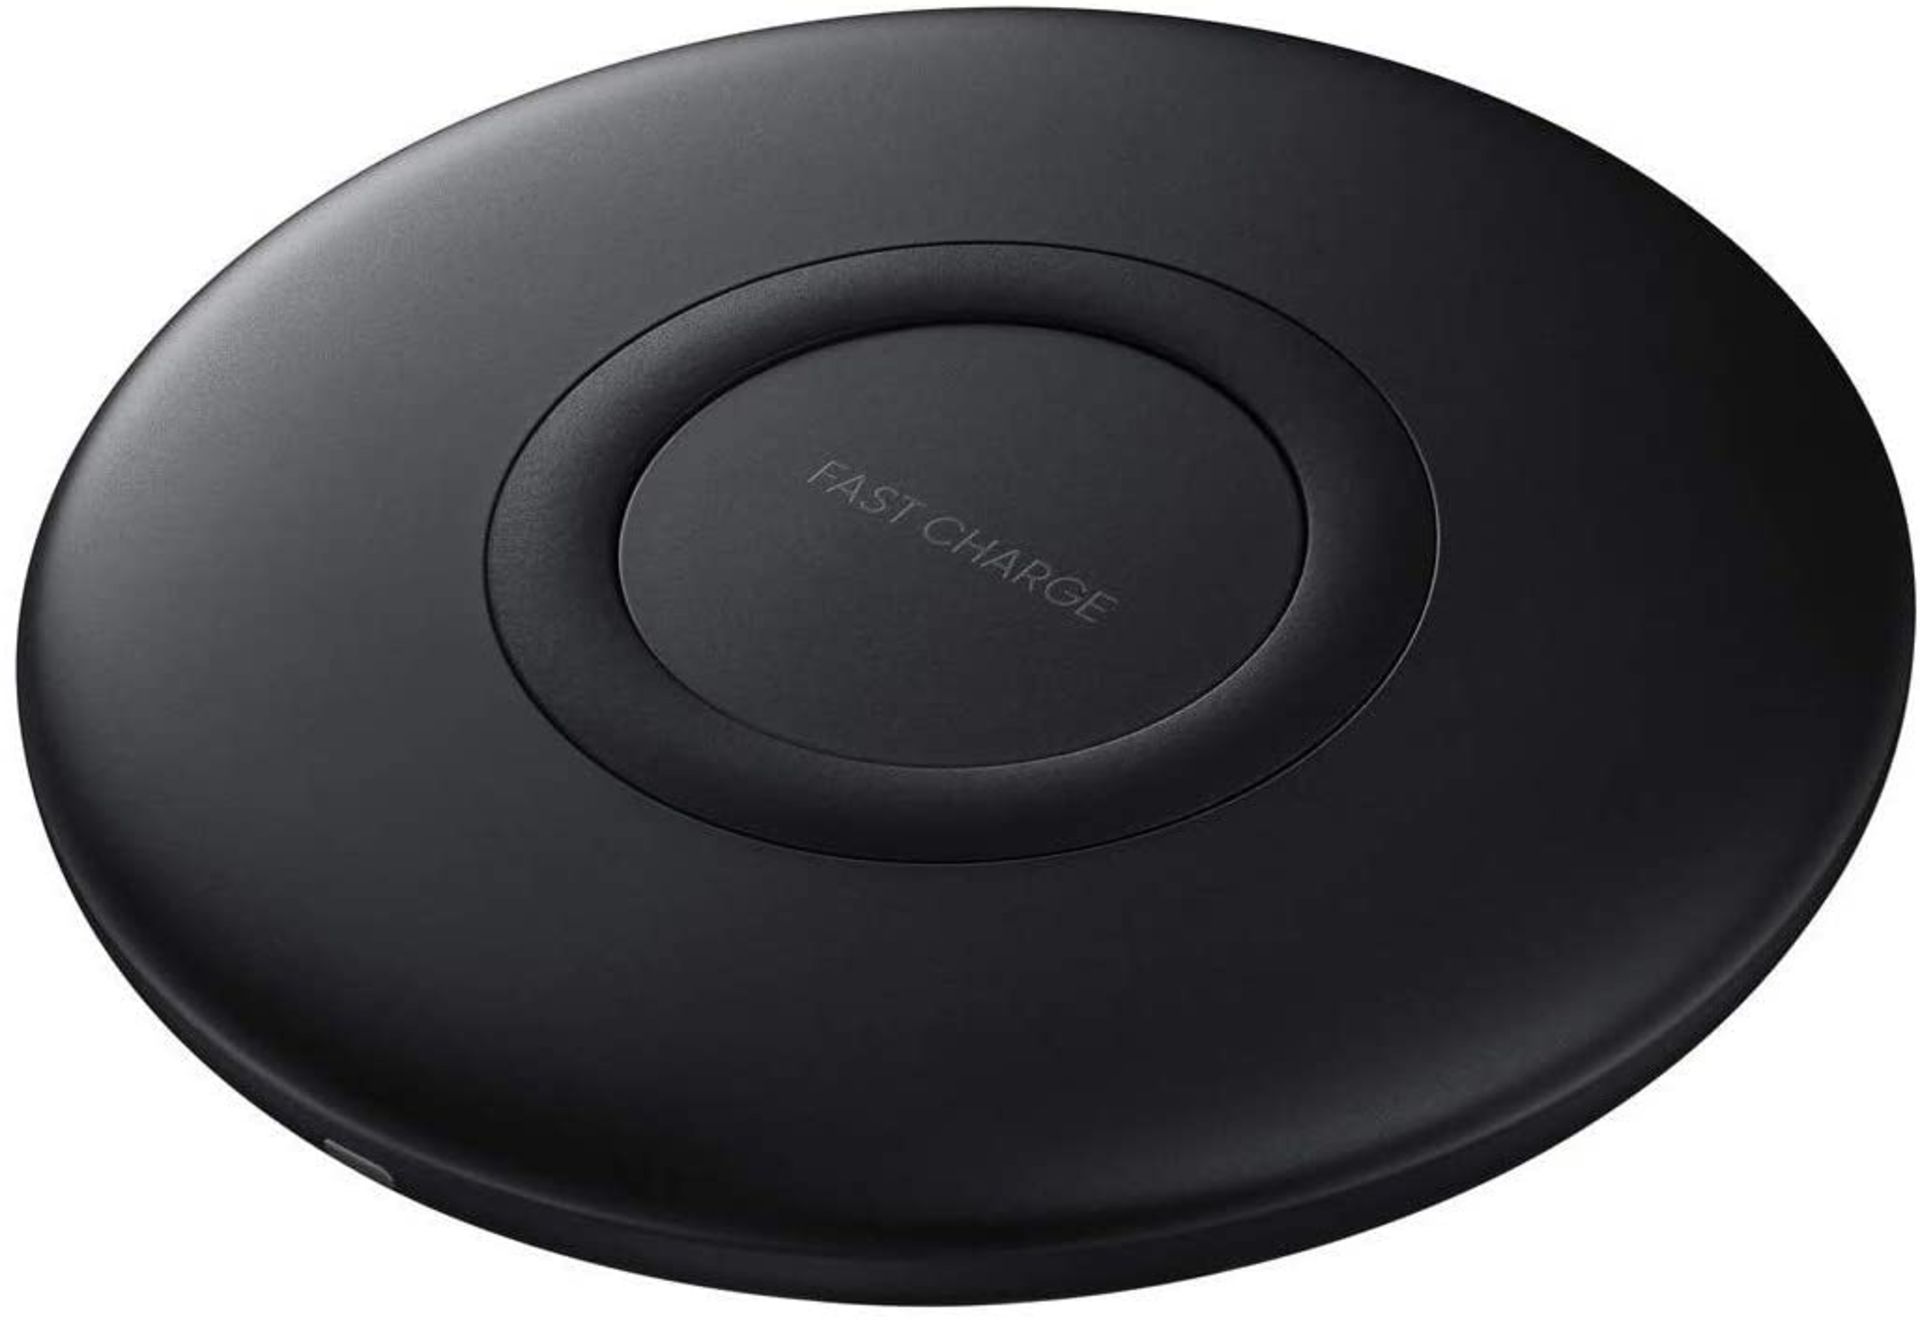 GRADE B - Samsung Original Wireless Fast Charging Pad for Qi Enabled Devices, Black RRP £30Condition